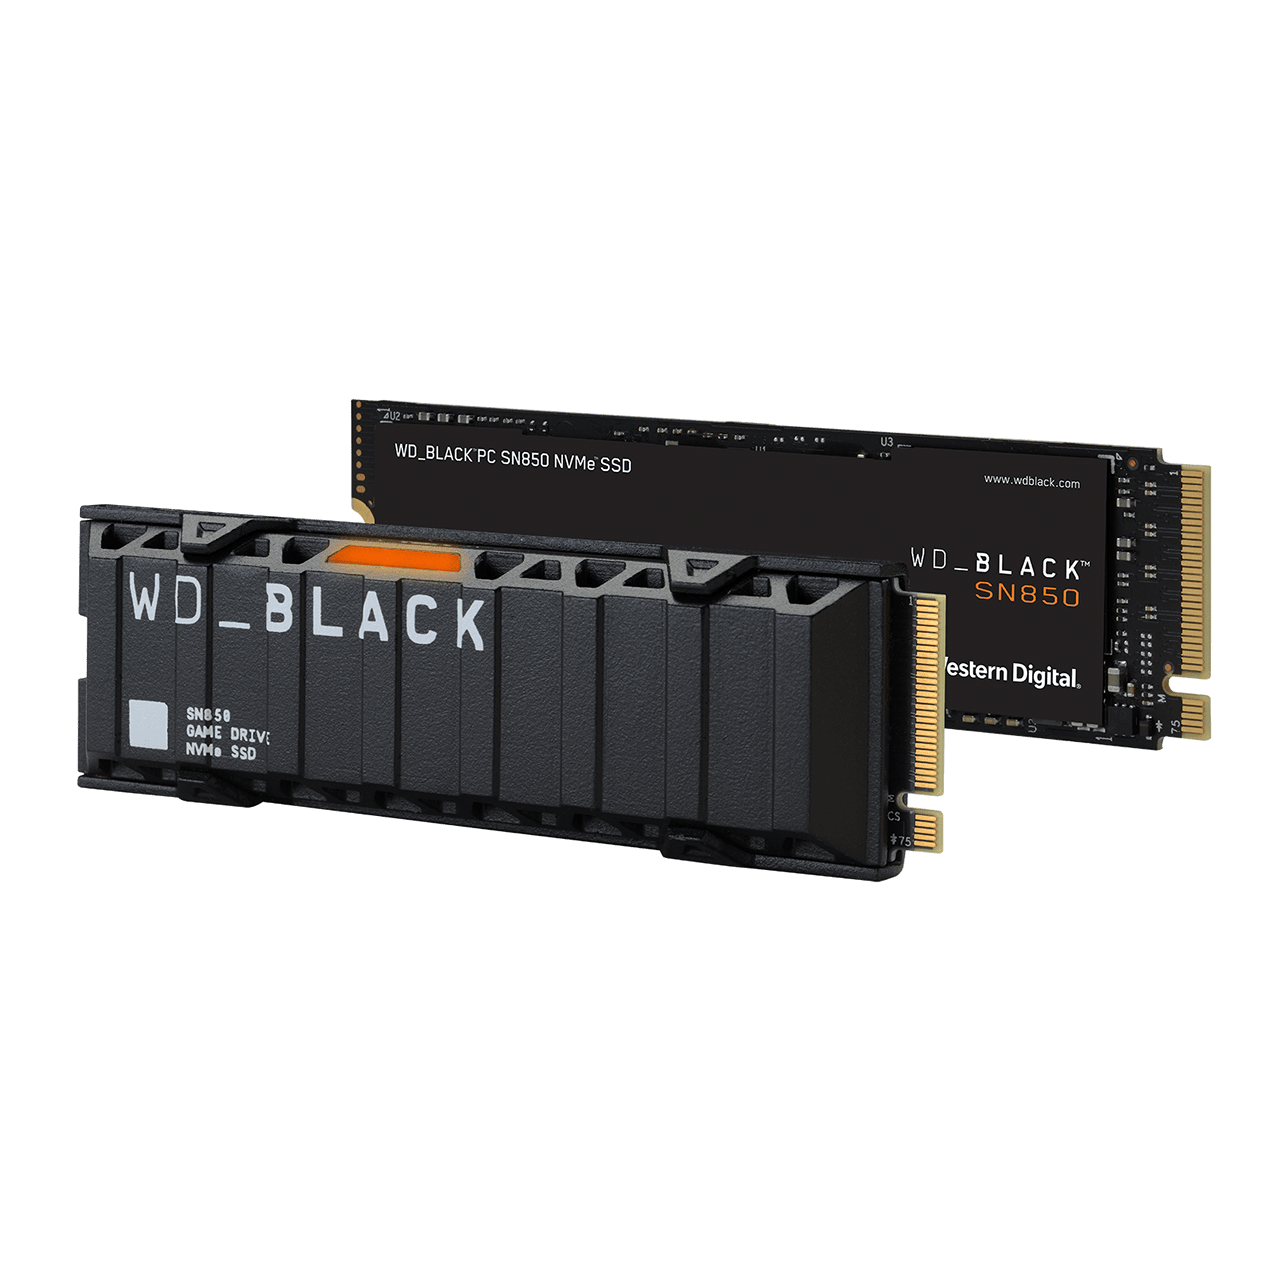 Western Digital Announces the Black SN850 SSD with 7GB/s and 5.3GB/s  Read/Write speeds - The New Speed King